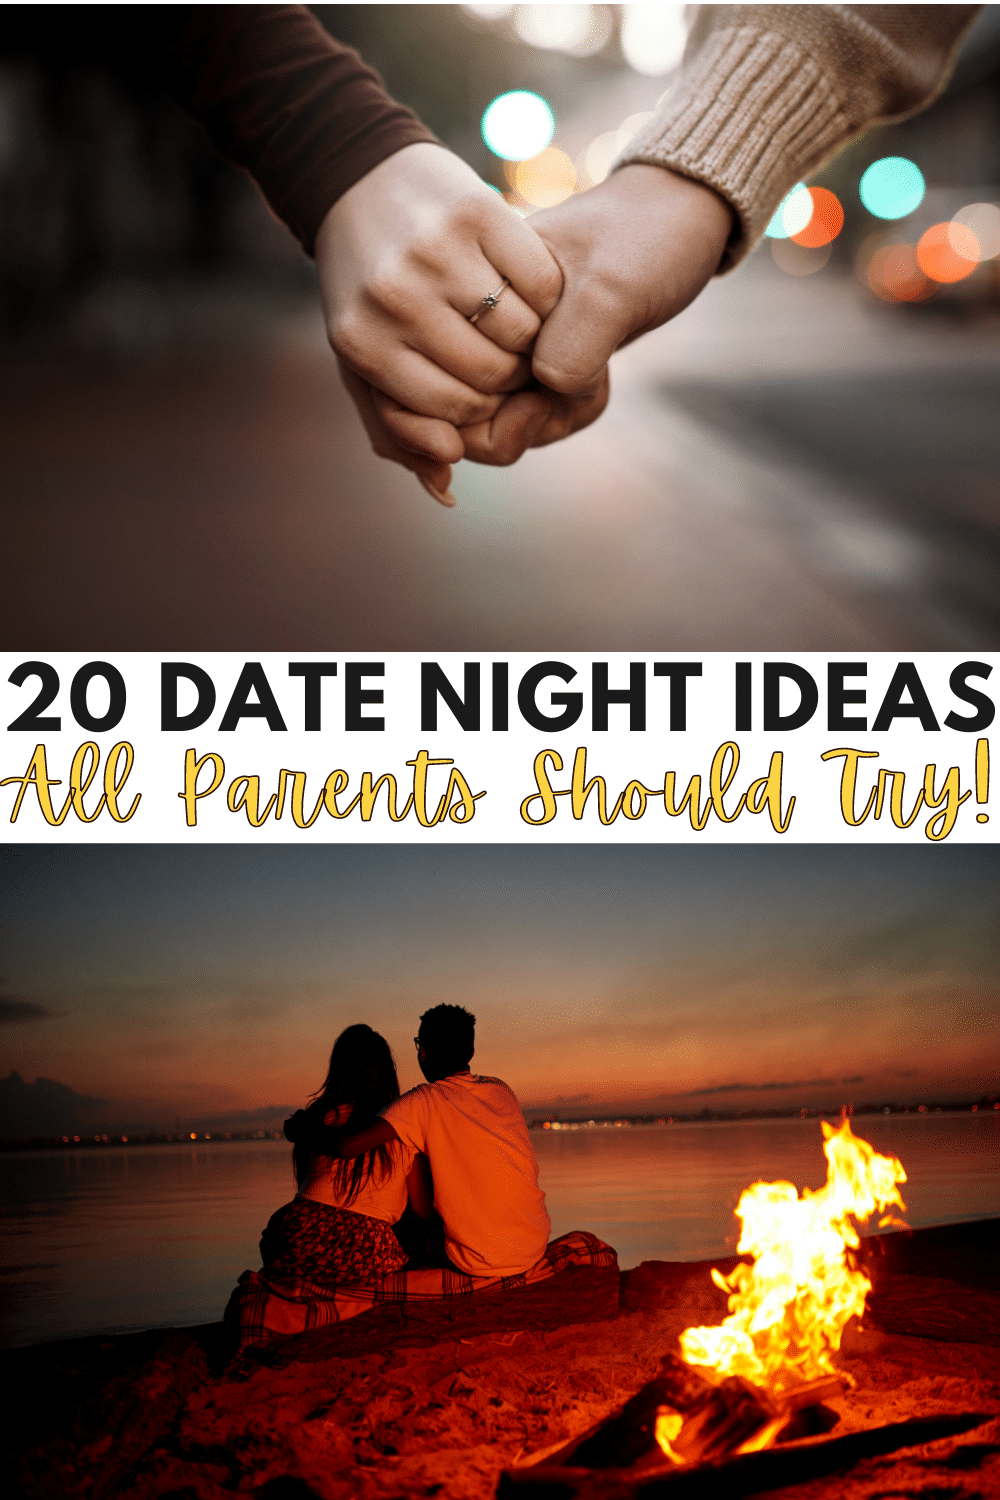 Here are lots of date night ideas so when you and your spouse finally plan date night you won’t abandon the idea just because you don’t know what to do. #datenight #datenightideas #datenightdoneright #datenightready via @wondermomwannab